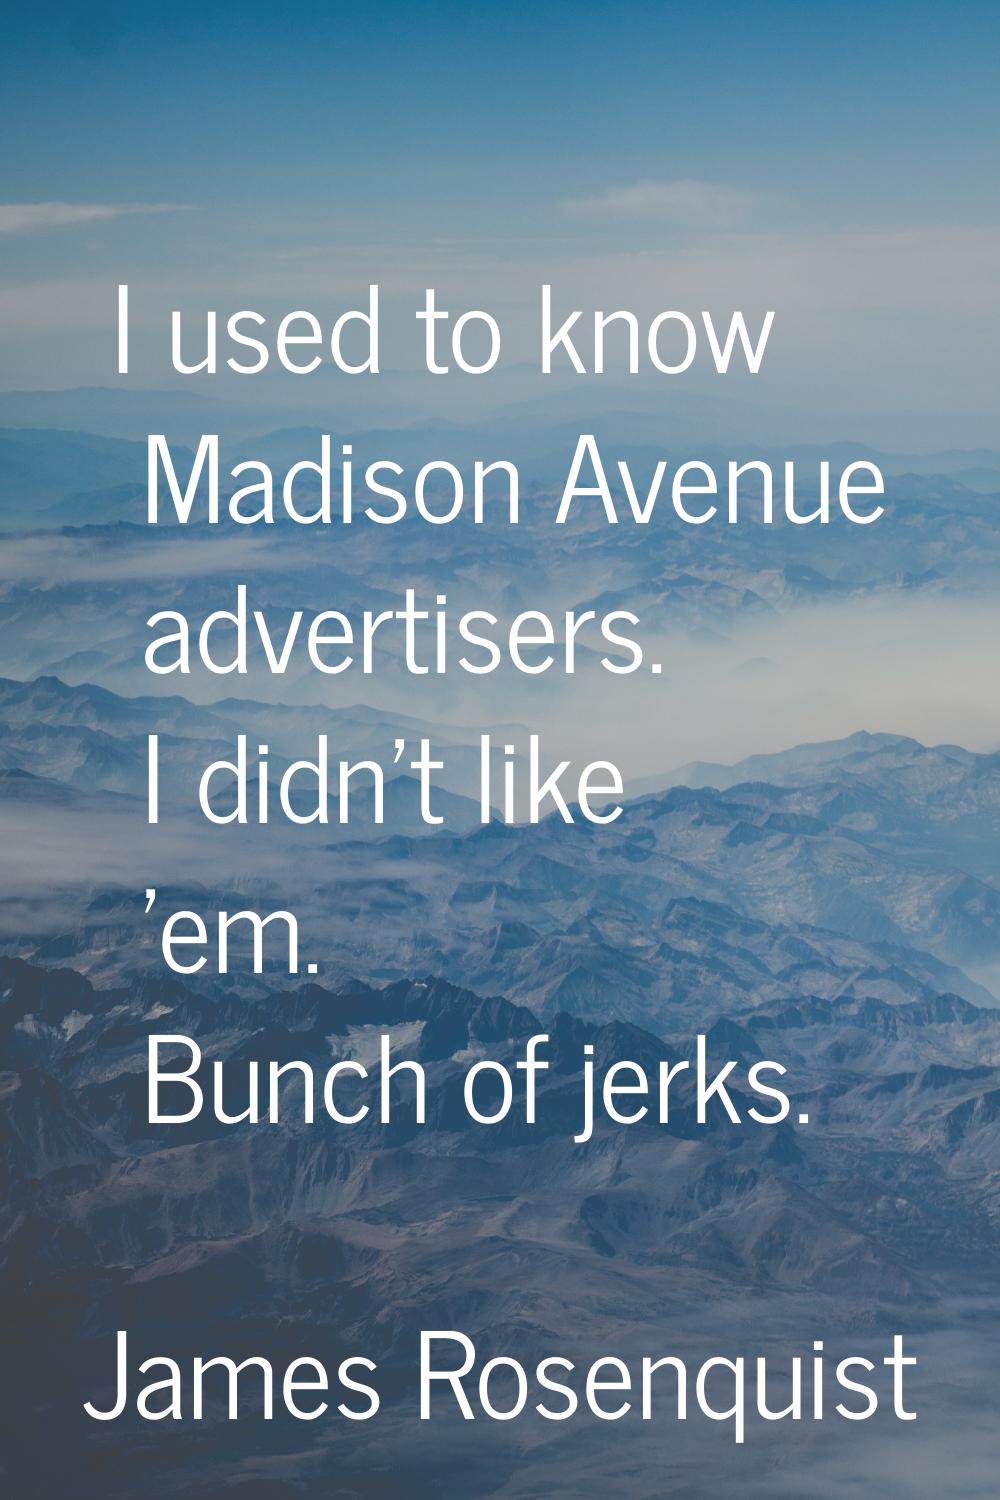 I used to know Madison Avenue advertisers. I didn't like 'em. Bunch of jerks.